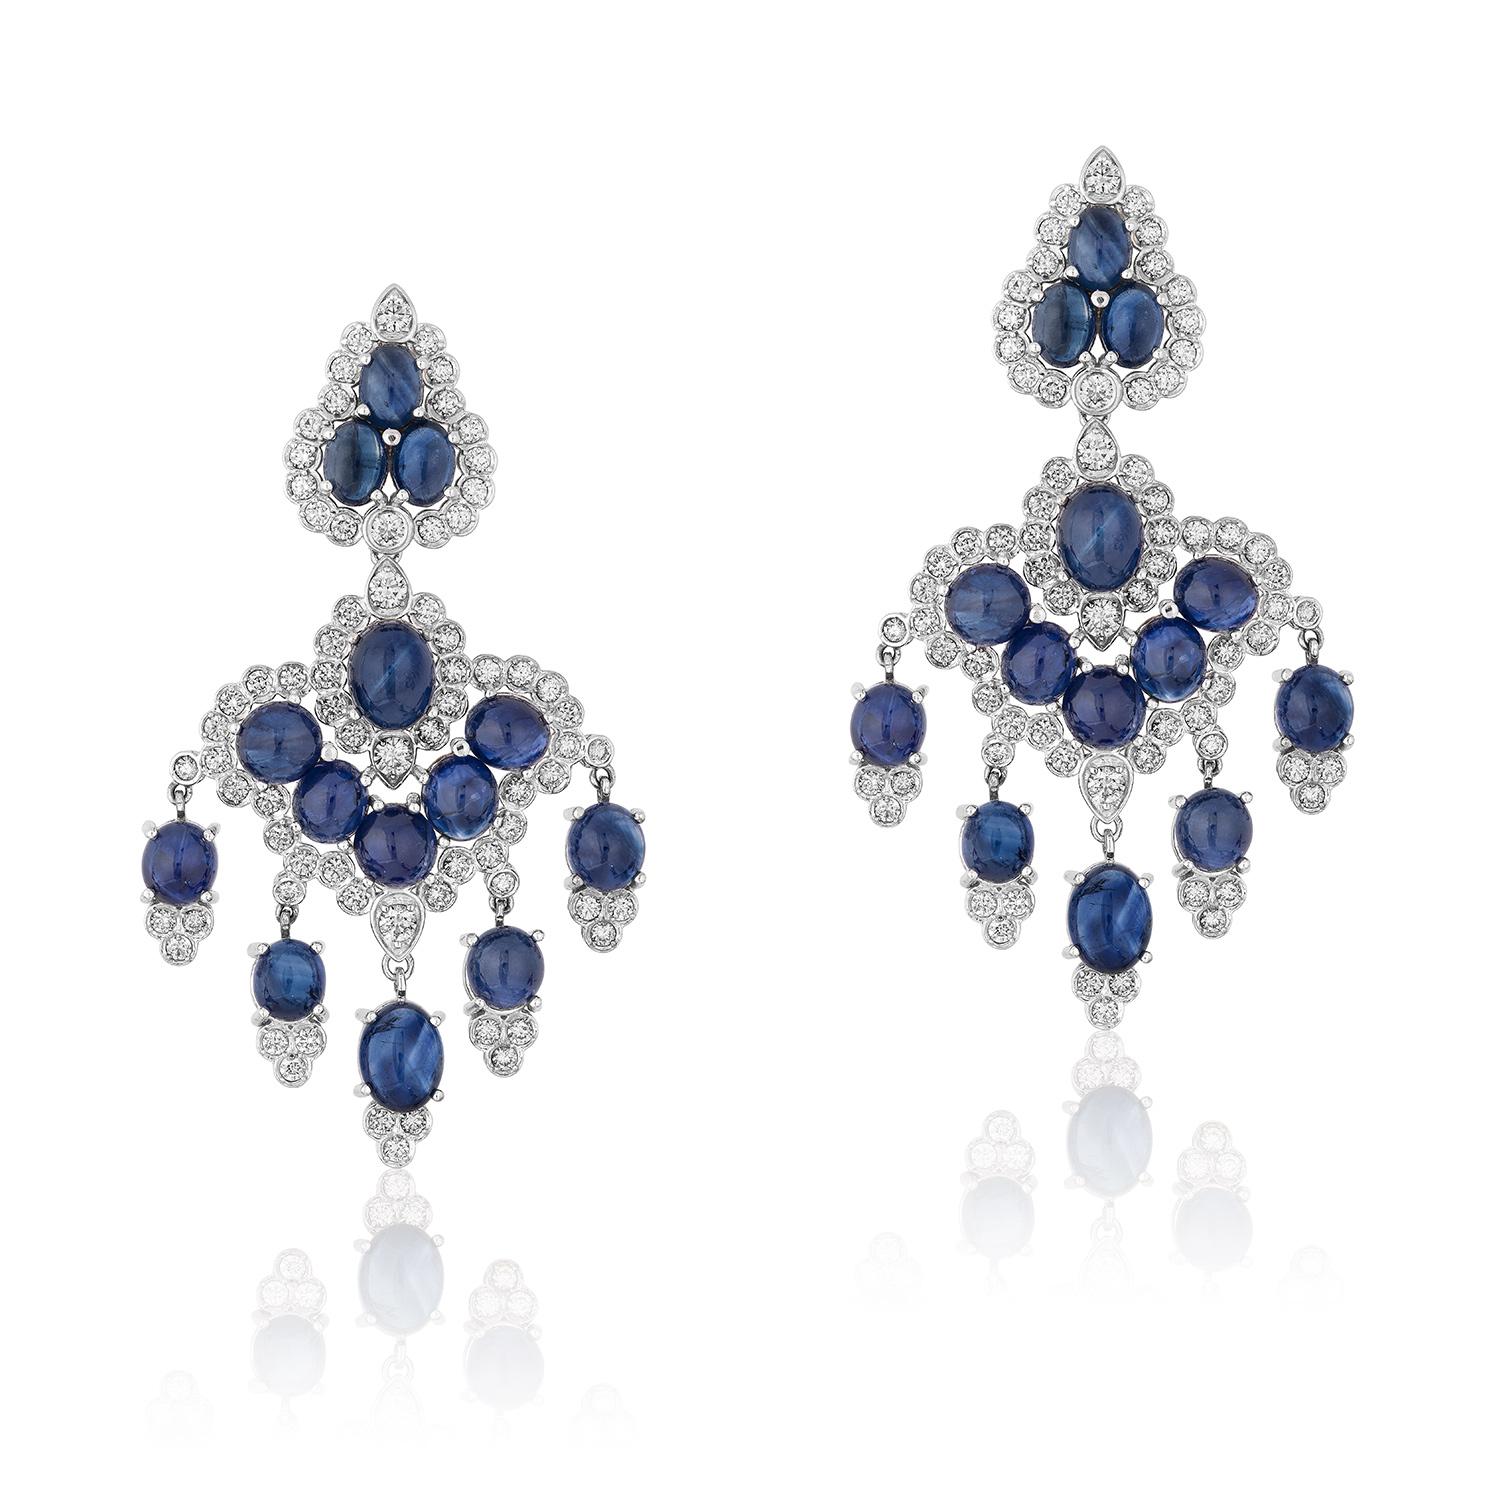 Contemporary Andreoli Cabochon Blue Sapphire Diamond 18 Karat White Gold Earrings For Sale